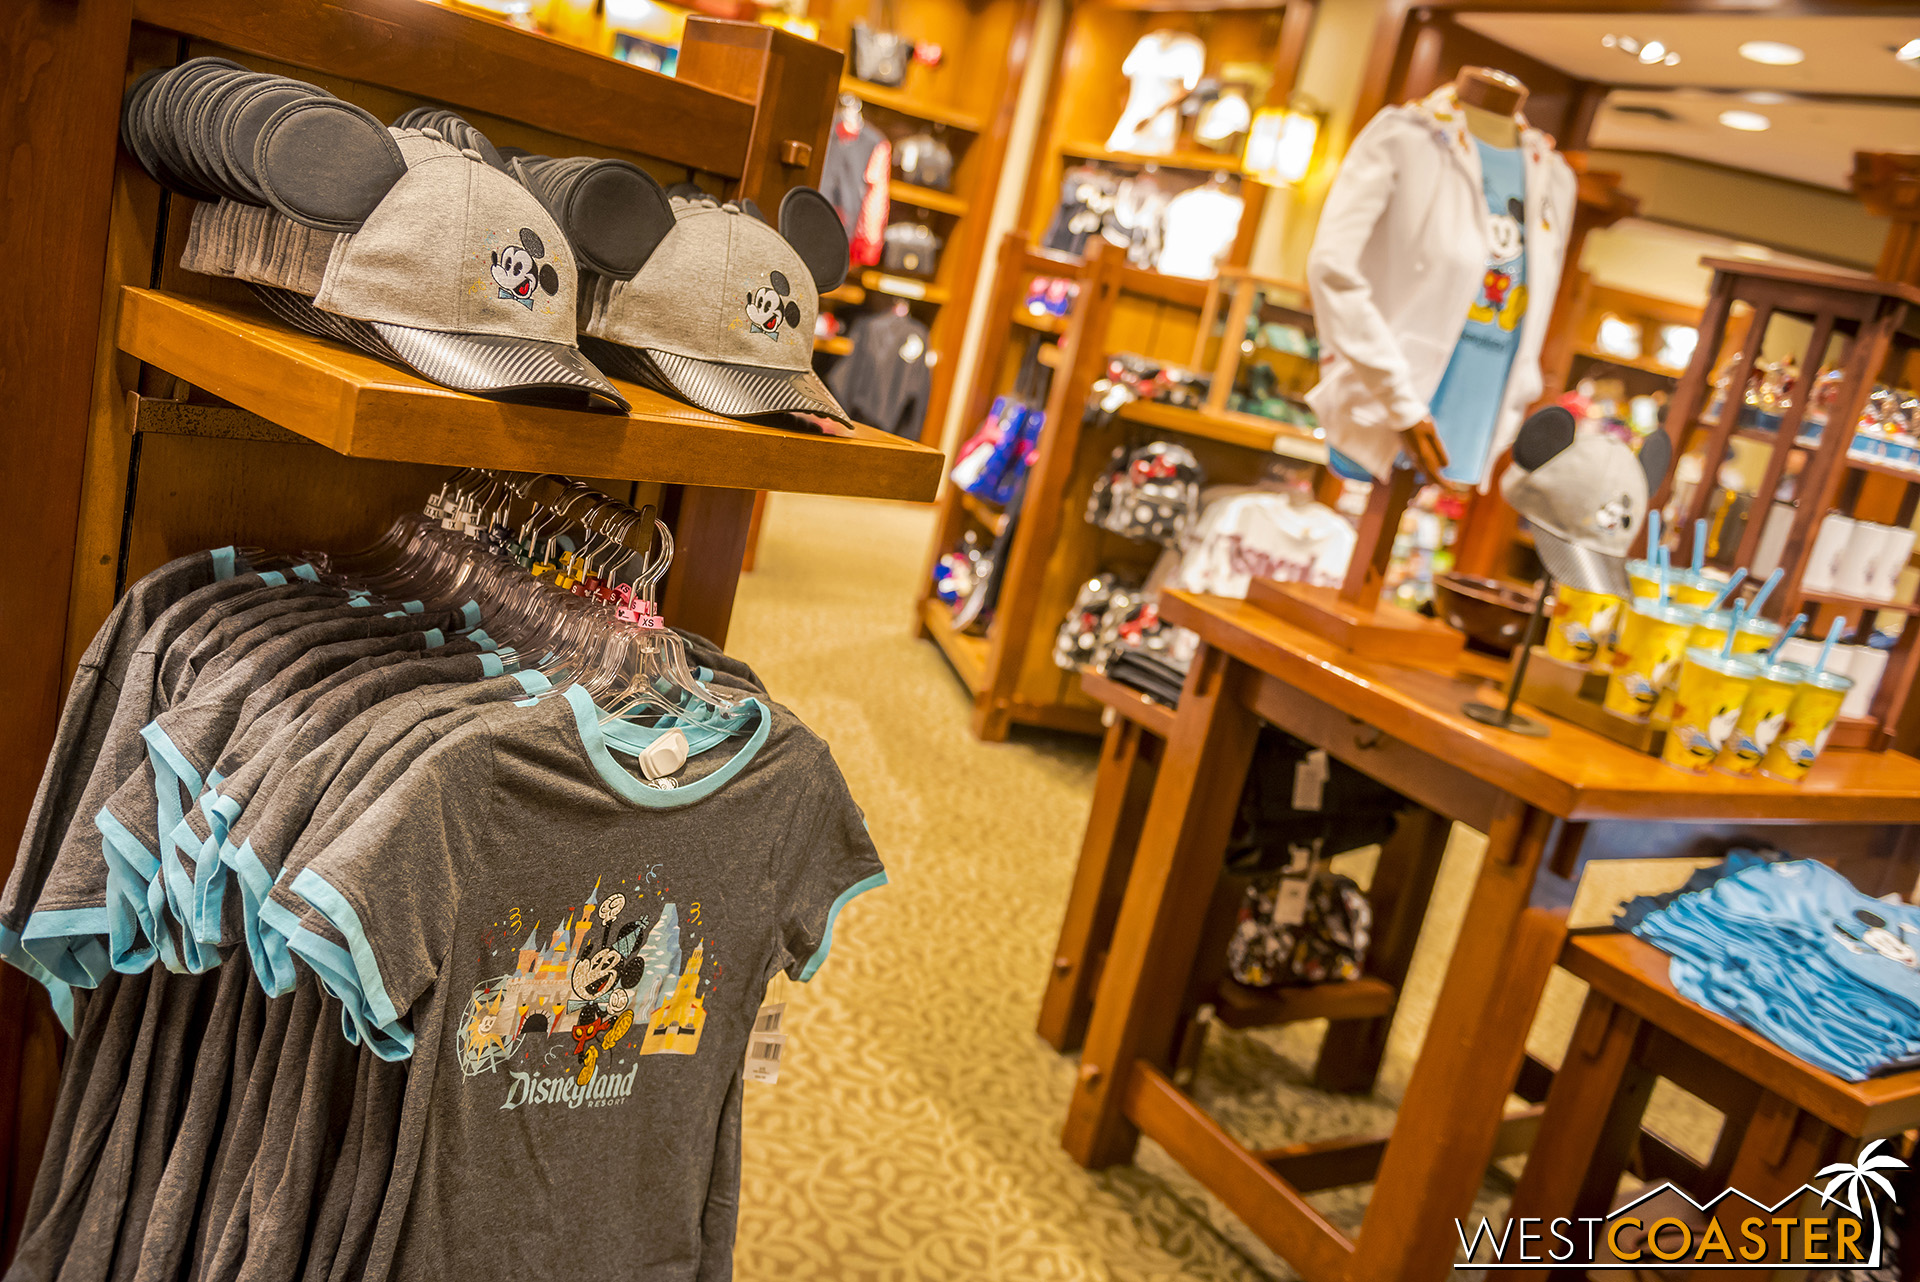  Disney has certainly figured out how to milk the merch in conjunction with special, seasonal events! 